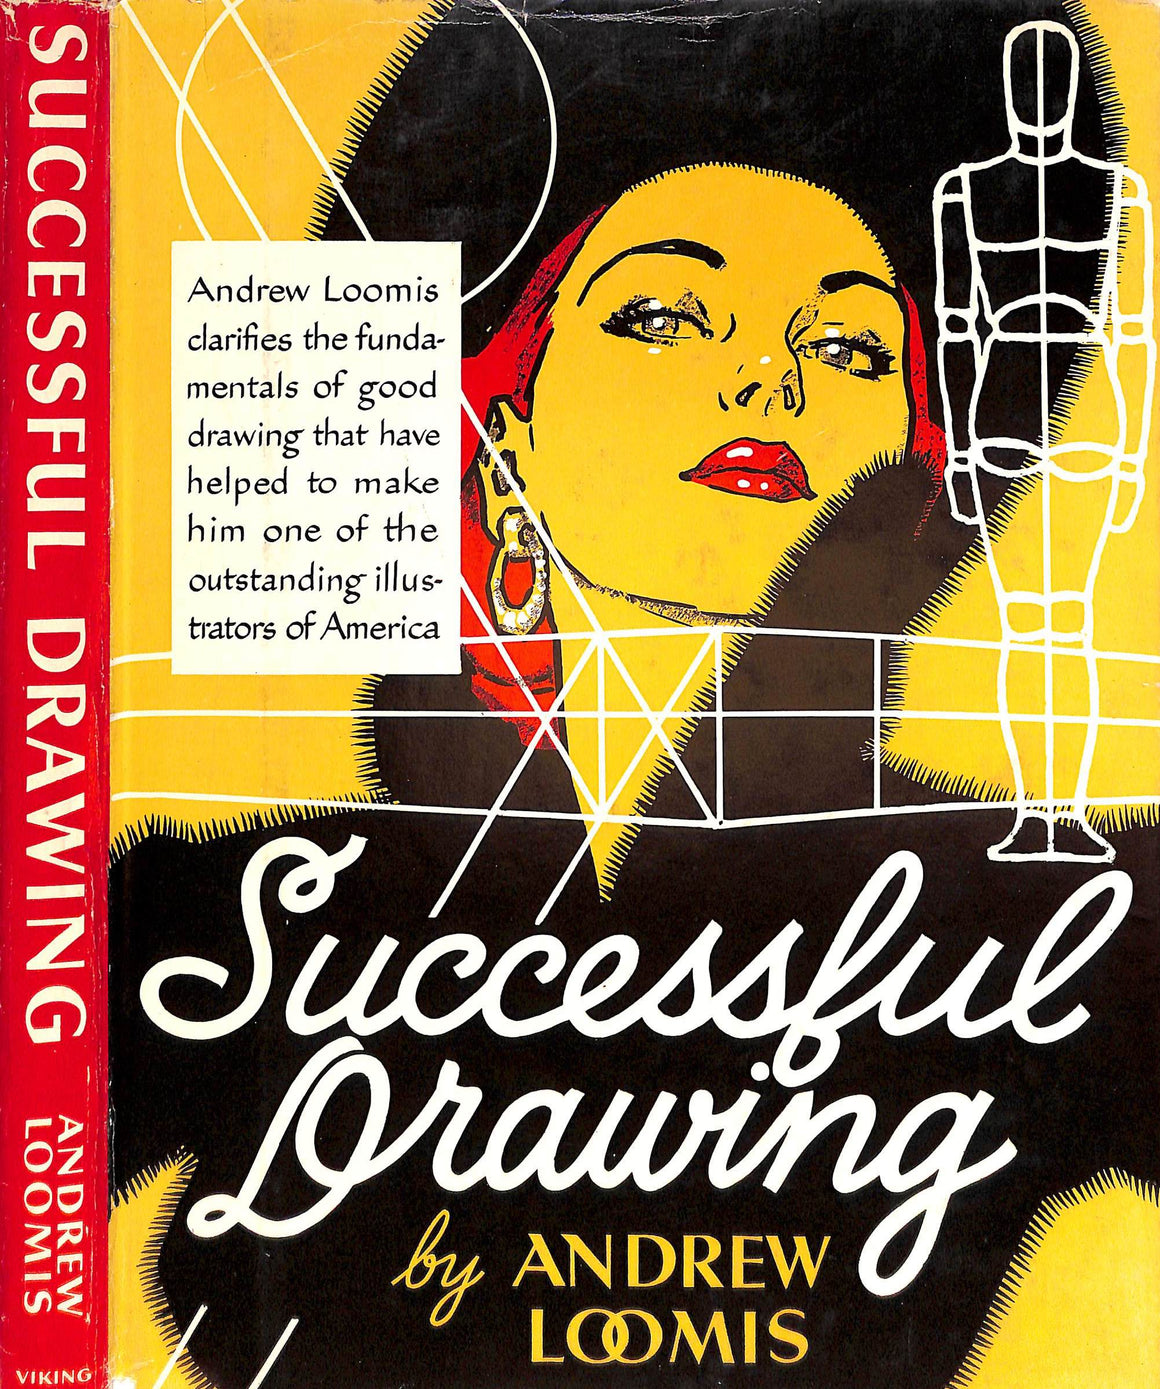 "Successful Drawing" 1951 LOOMIS,  Andrew